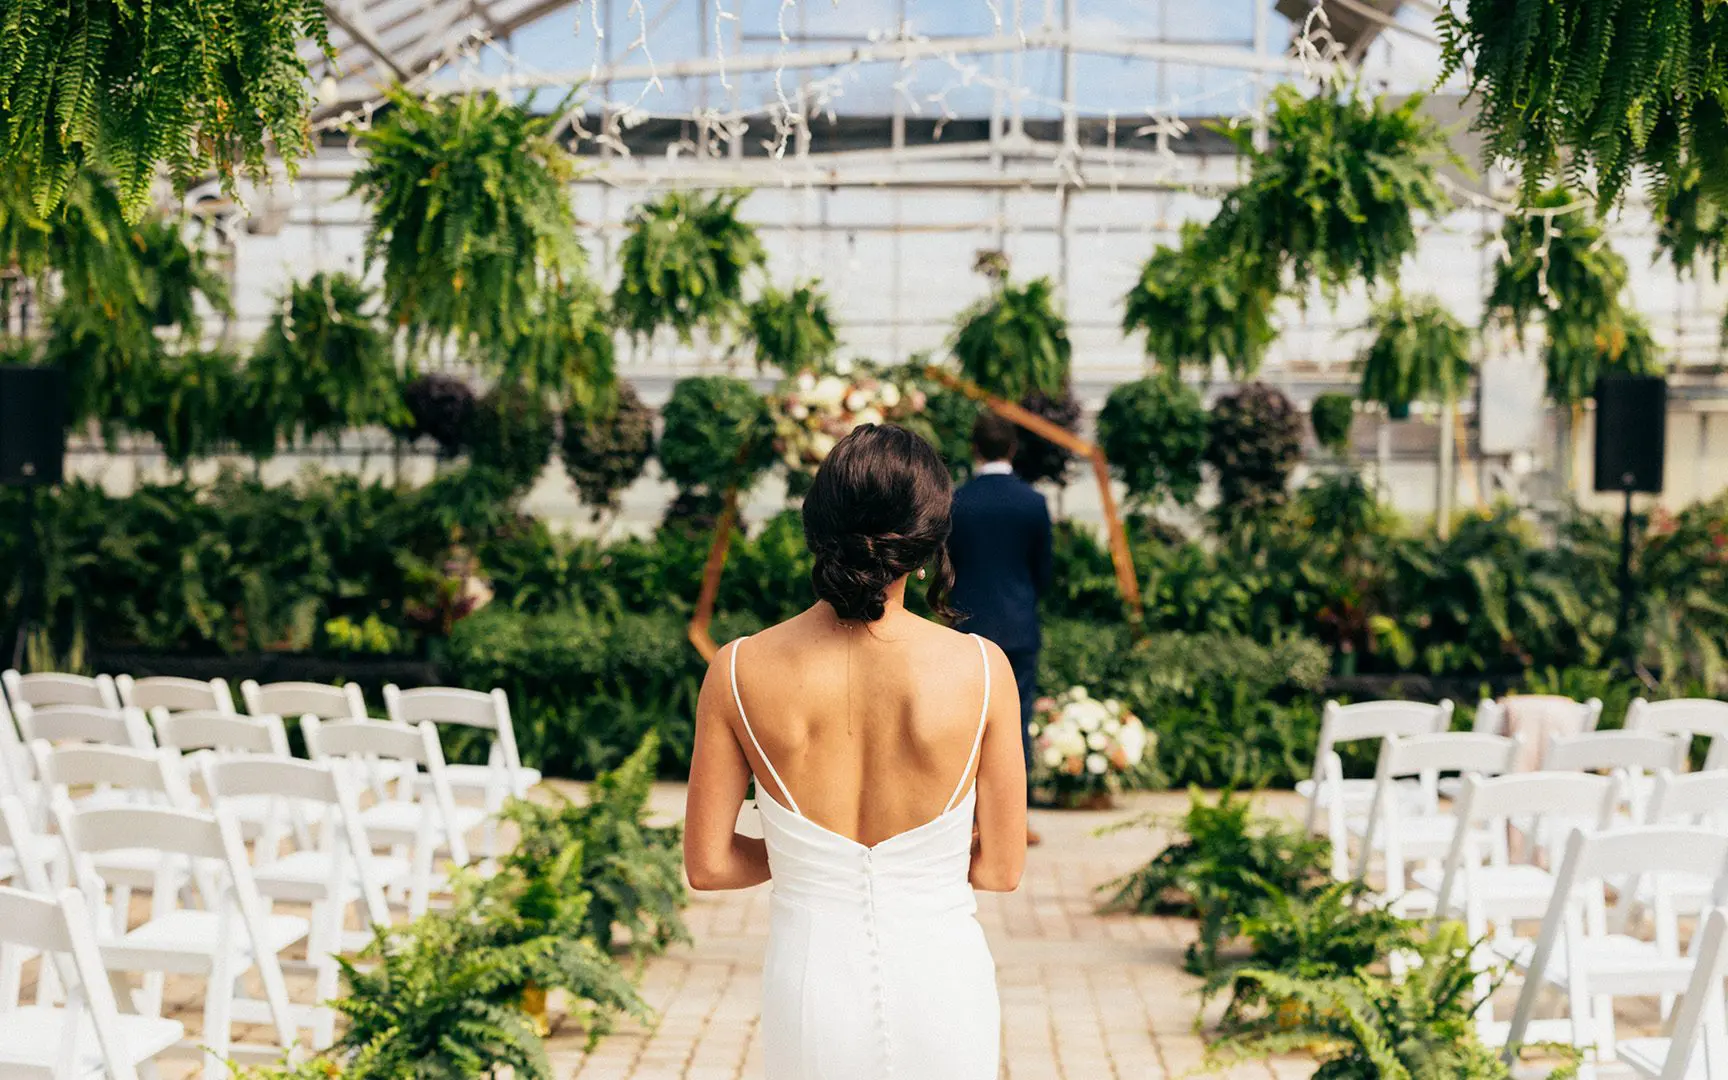 Bride in a white dress walking towards groom in a garden wedding ceremony setup with white chairs and hanging green plants.